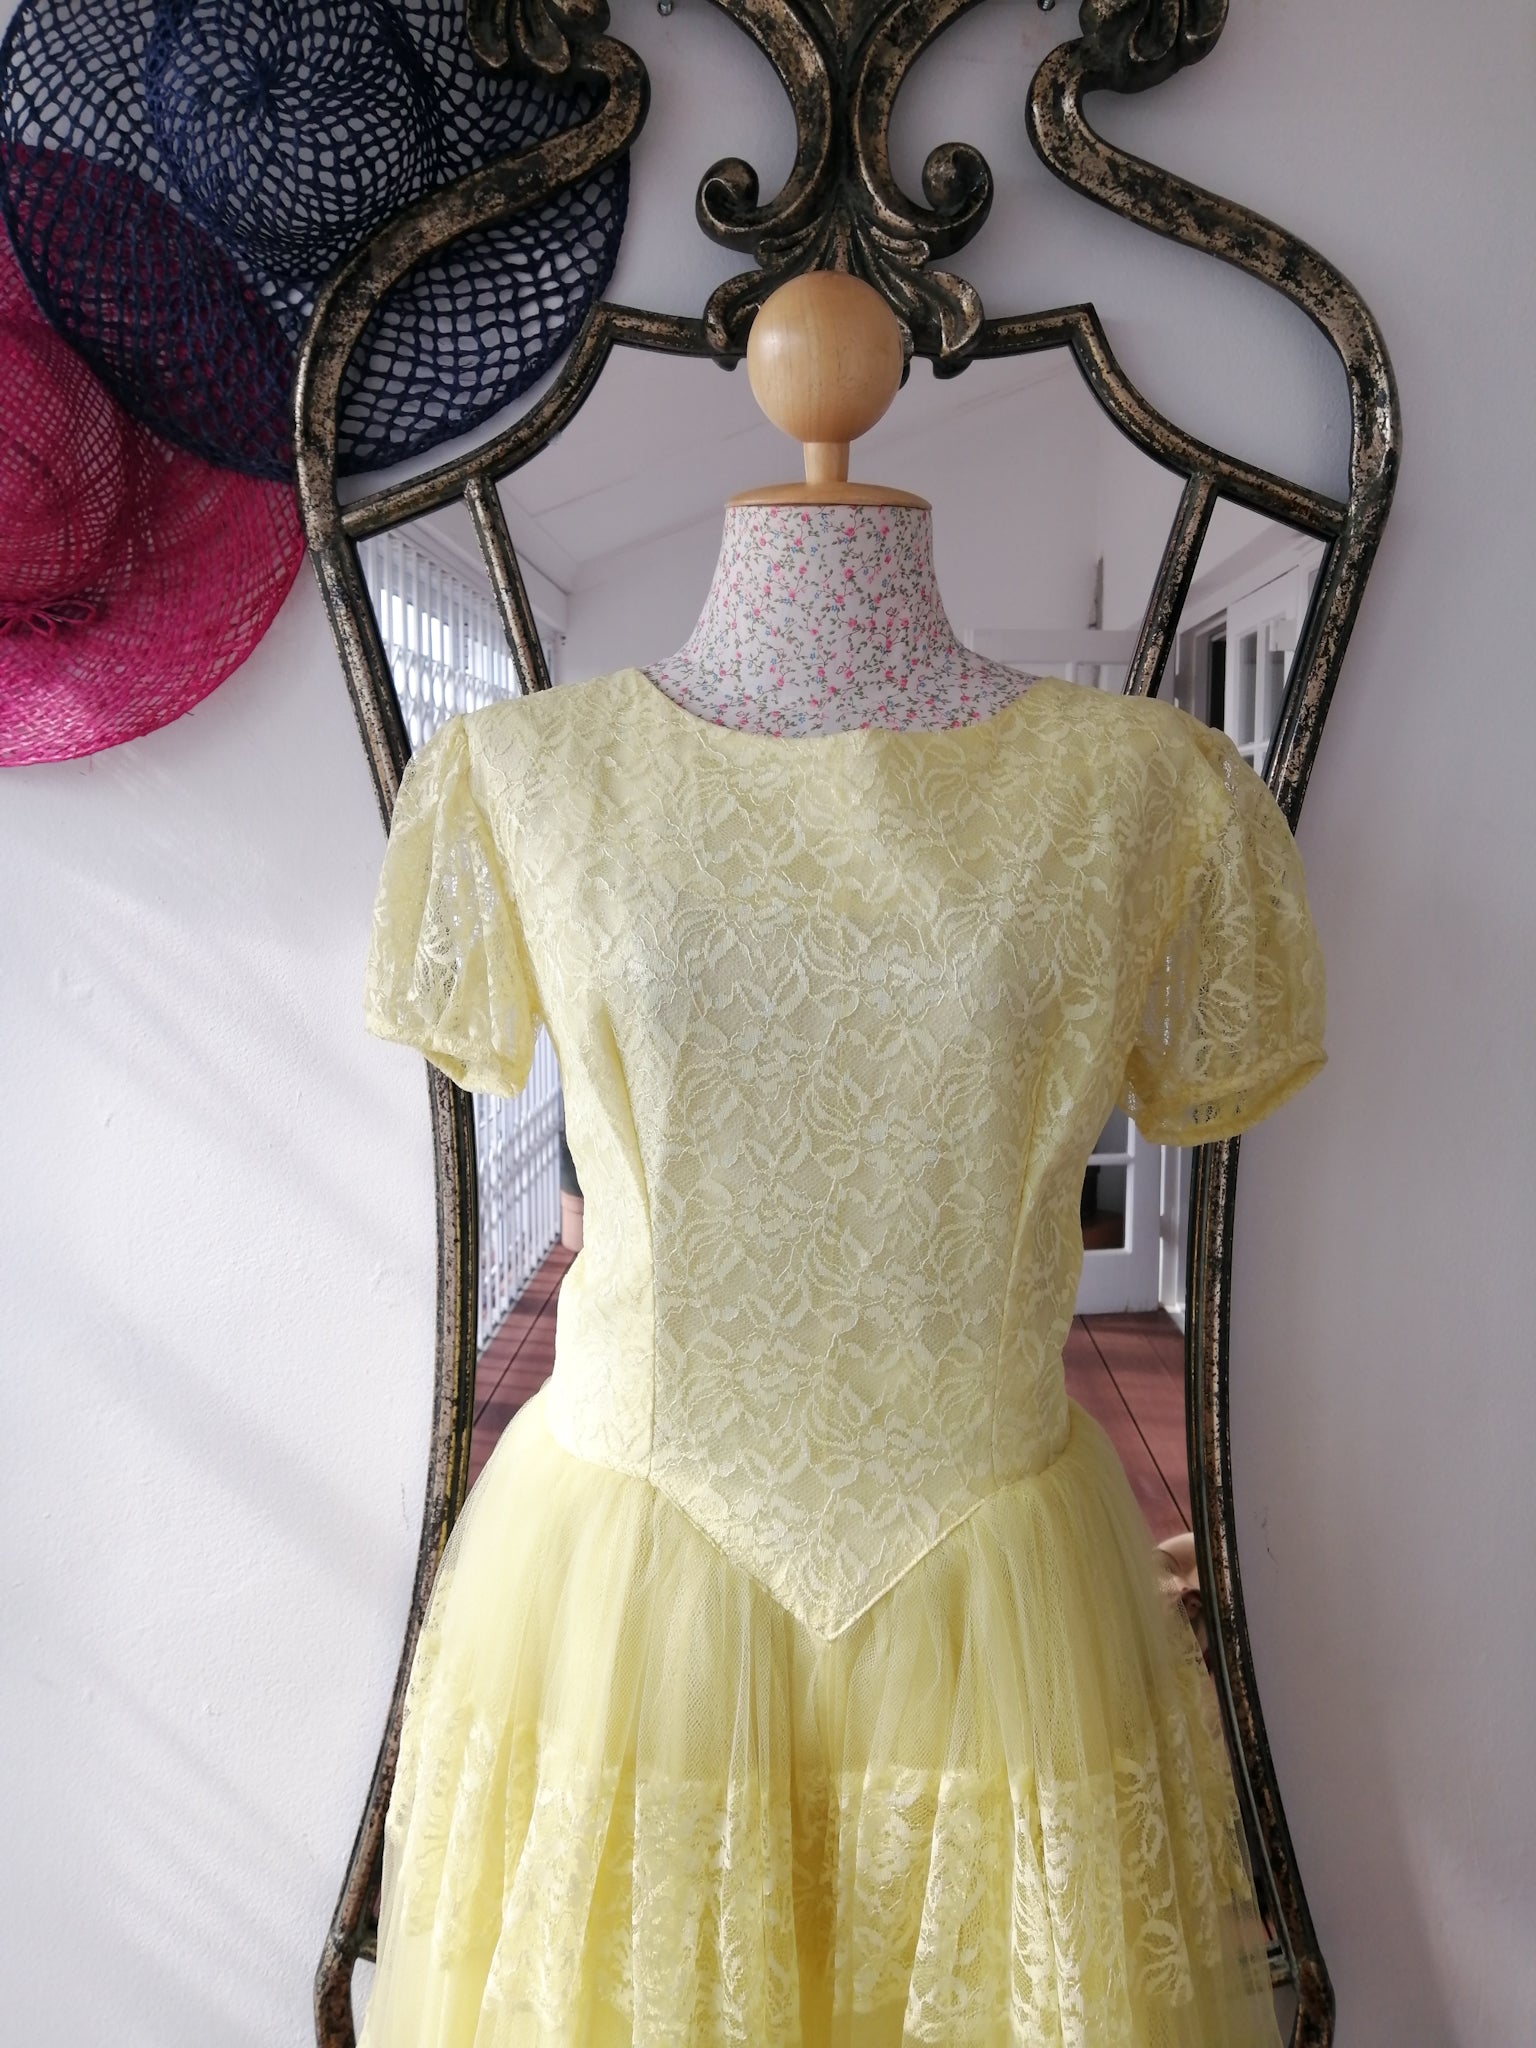 1980's Vintage yellow Beauty & Beast inspired lace dress